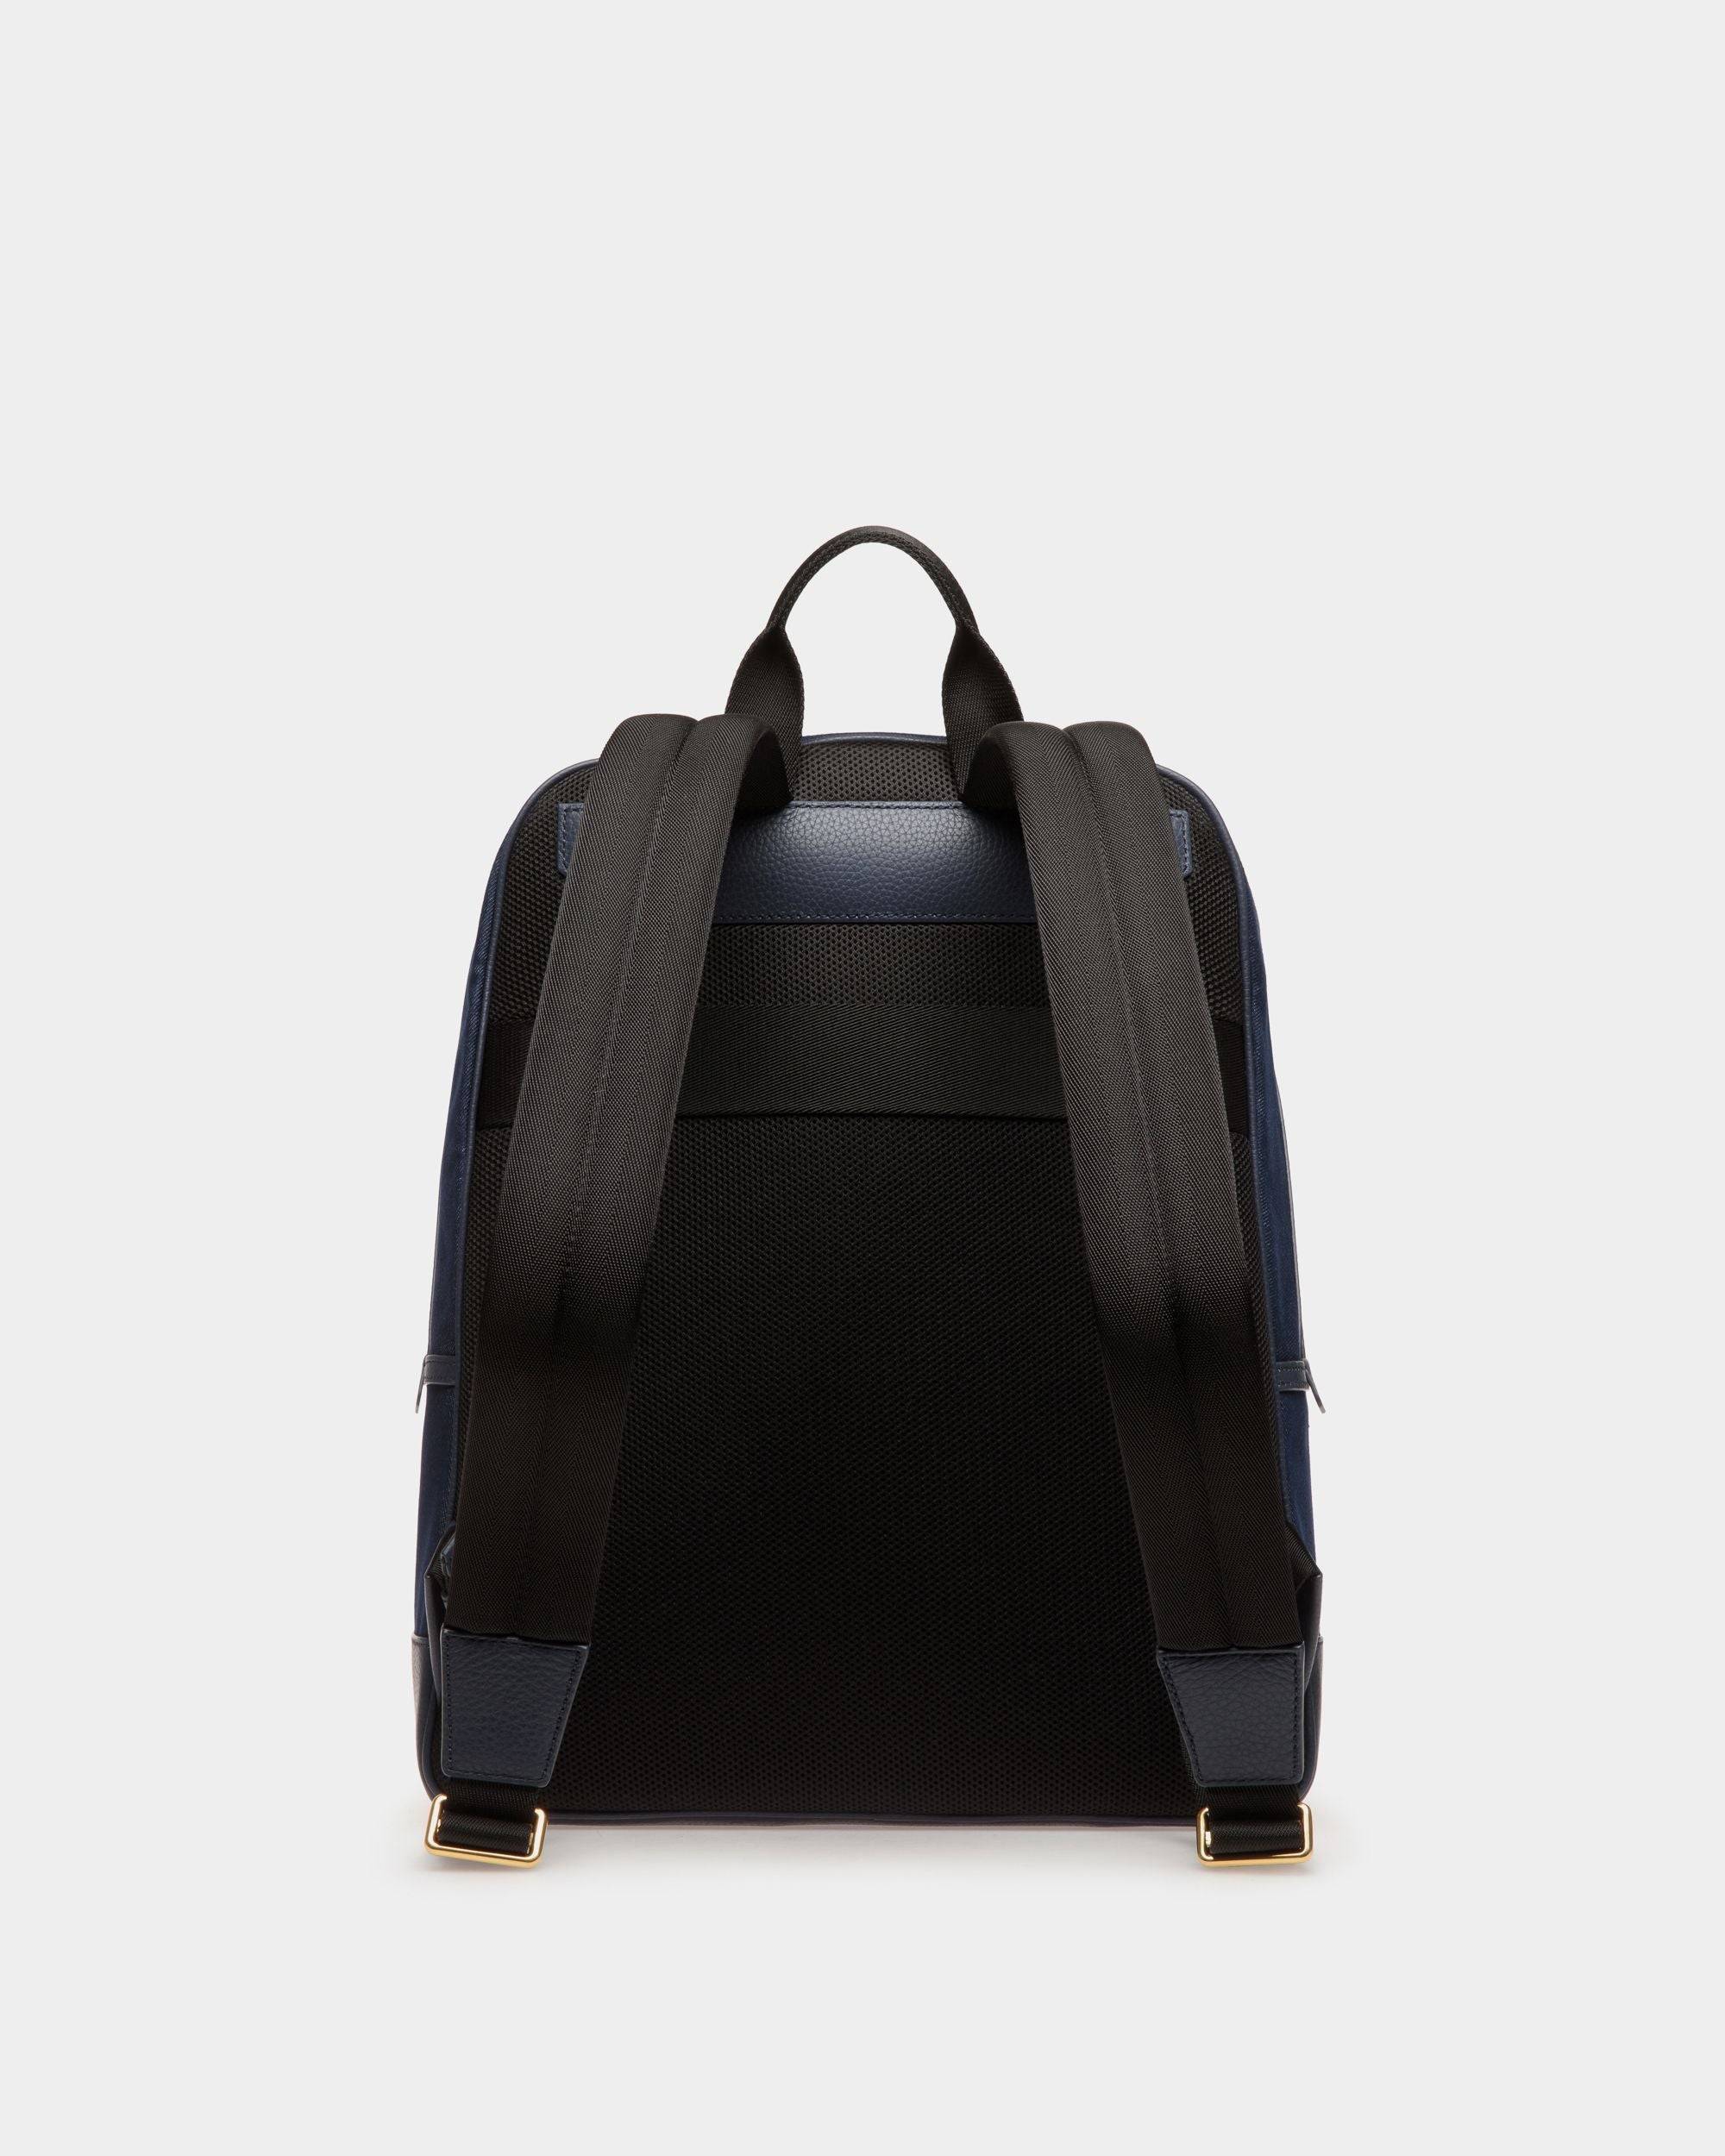 Bar | Men's Backpack in Blue Canvas And Leather | Bally | Still Life Back